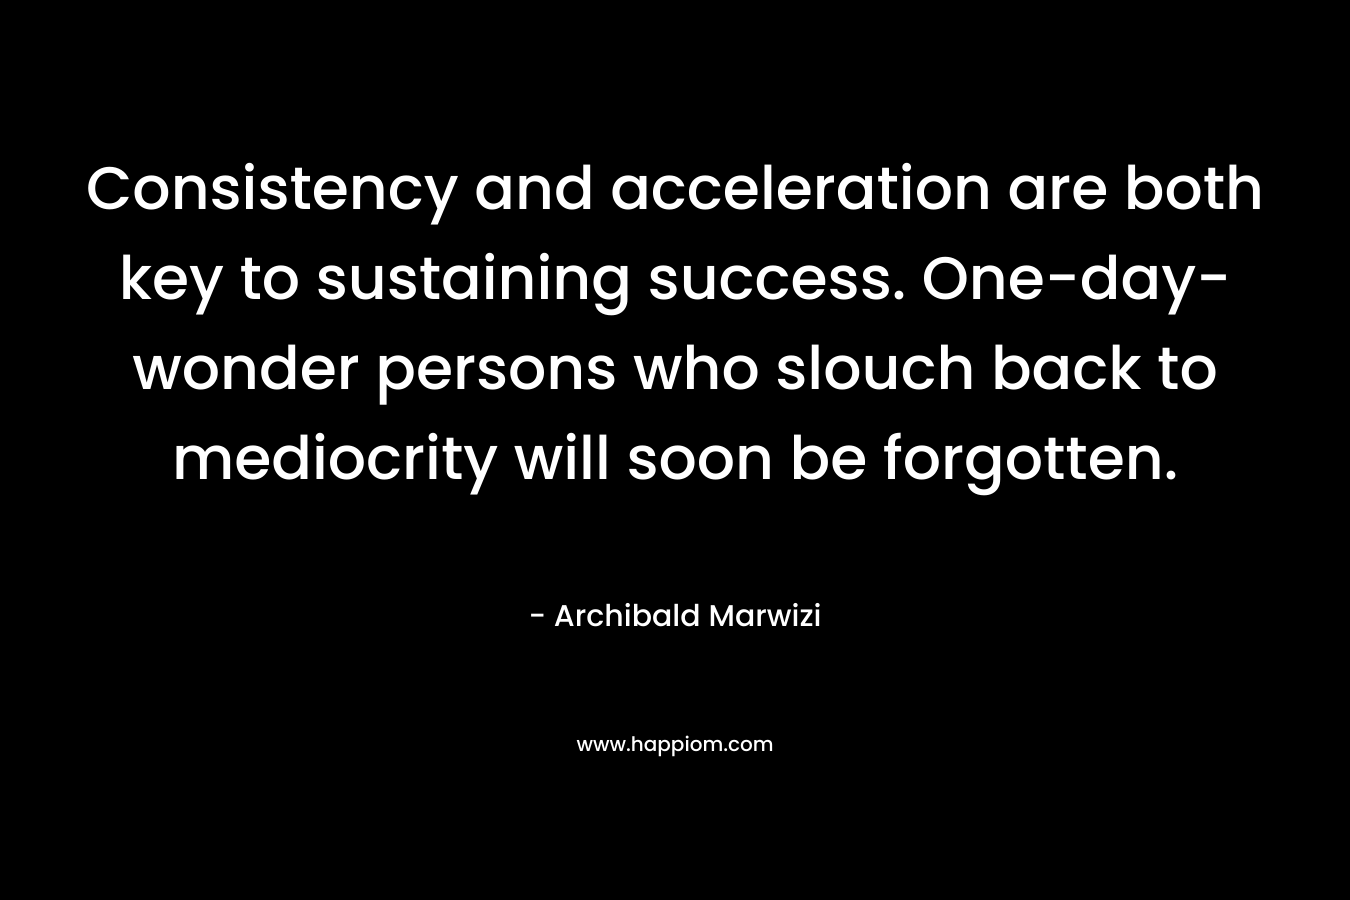 Consistency and acceleration are both key to sustaining success. One-day-wonder persons who slouch back to mediocrity will soon be forgotten.